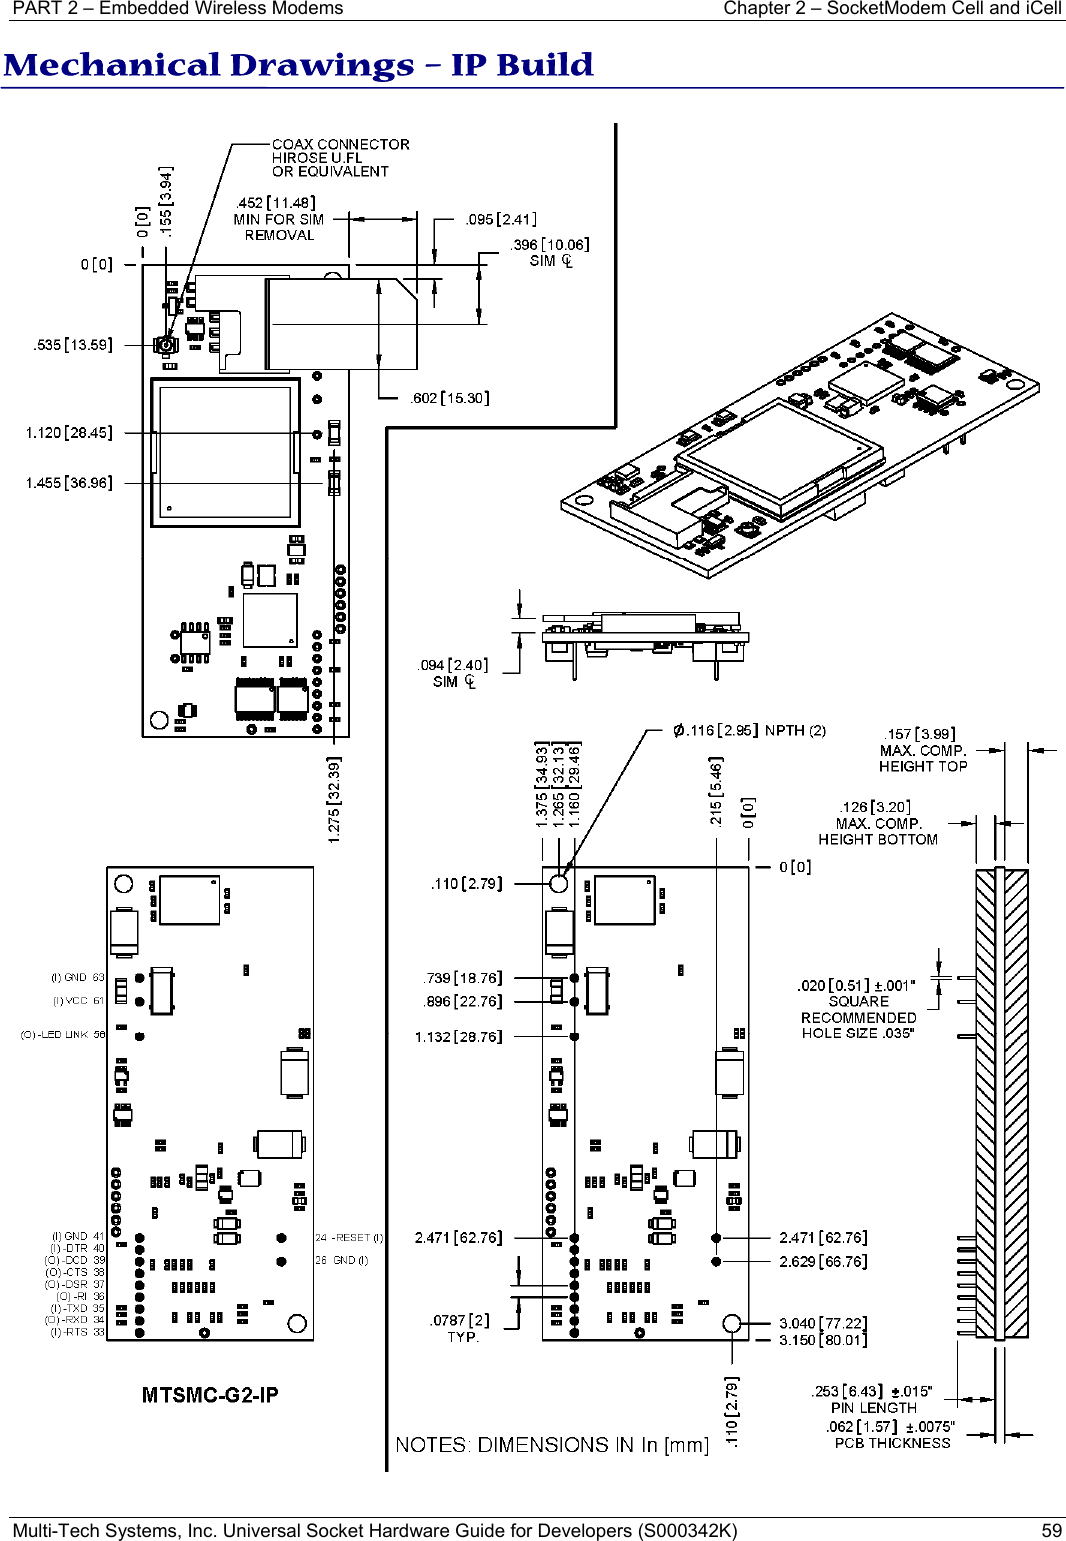 PART 2 – Embedded Wireless Modems   Chapter 2 – SocketModem Cell and iCell Multi-Tech Systems, Inc. Universal Socket Hardware Guide for Developers (S000342K)  59  Mechanical Drawings – IP Build 